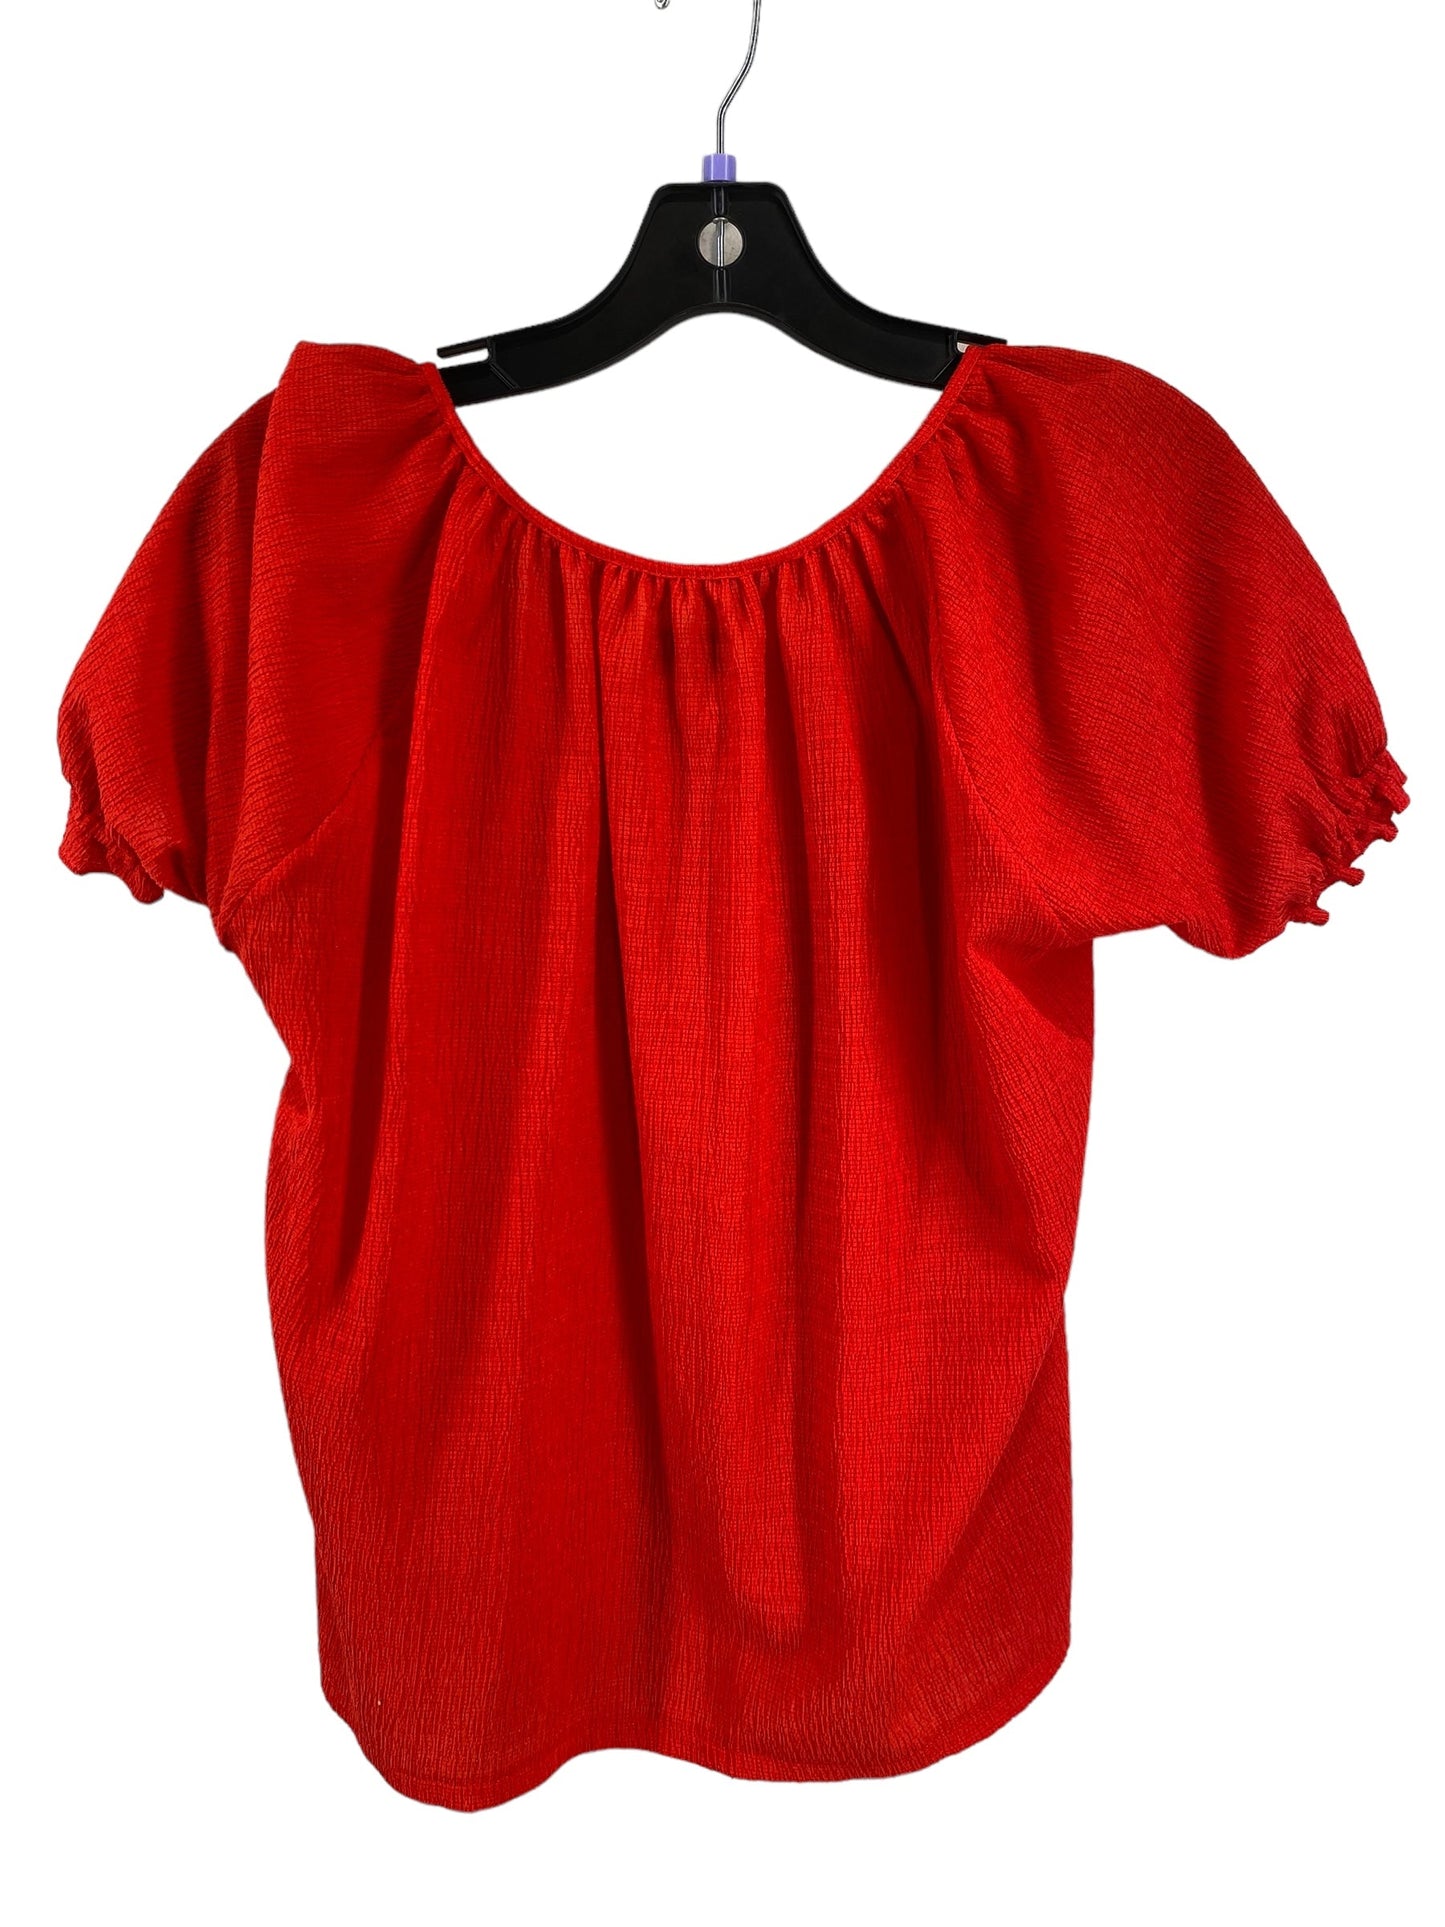 Red Blouse Short Sleeve Madewell, Size S